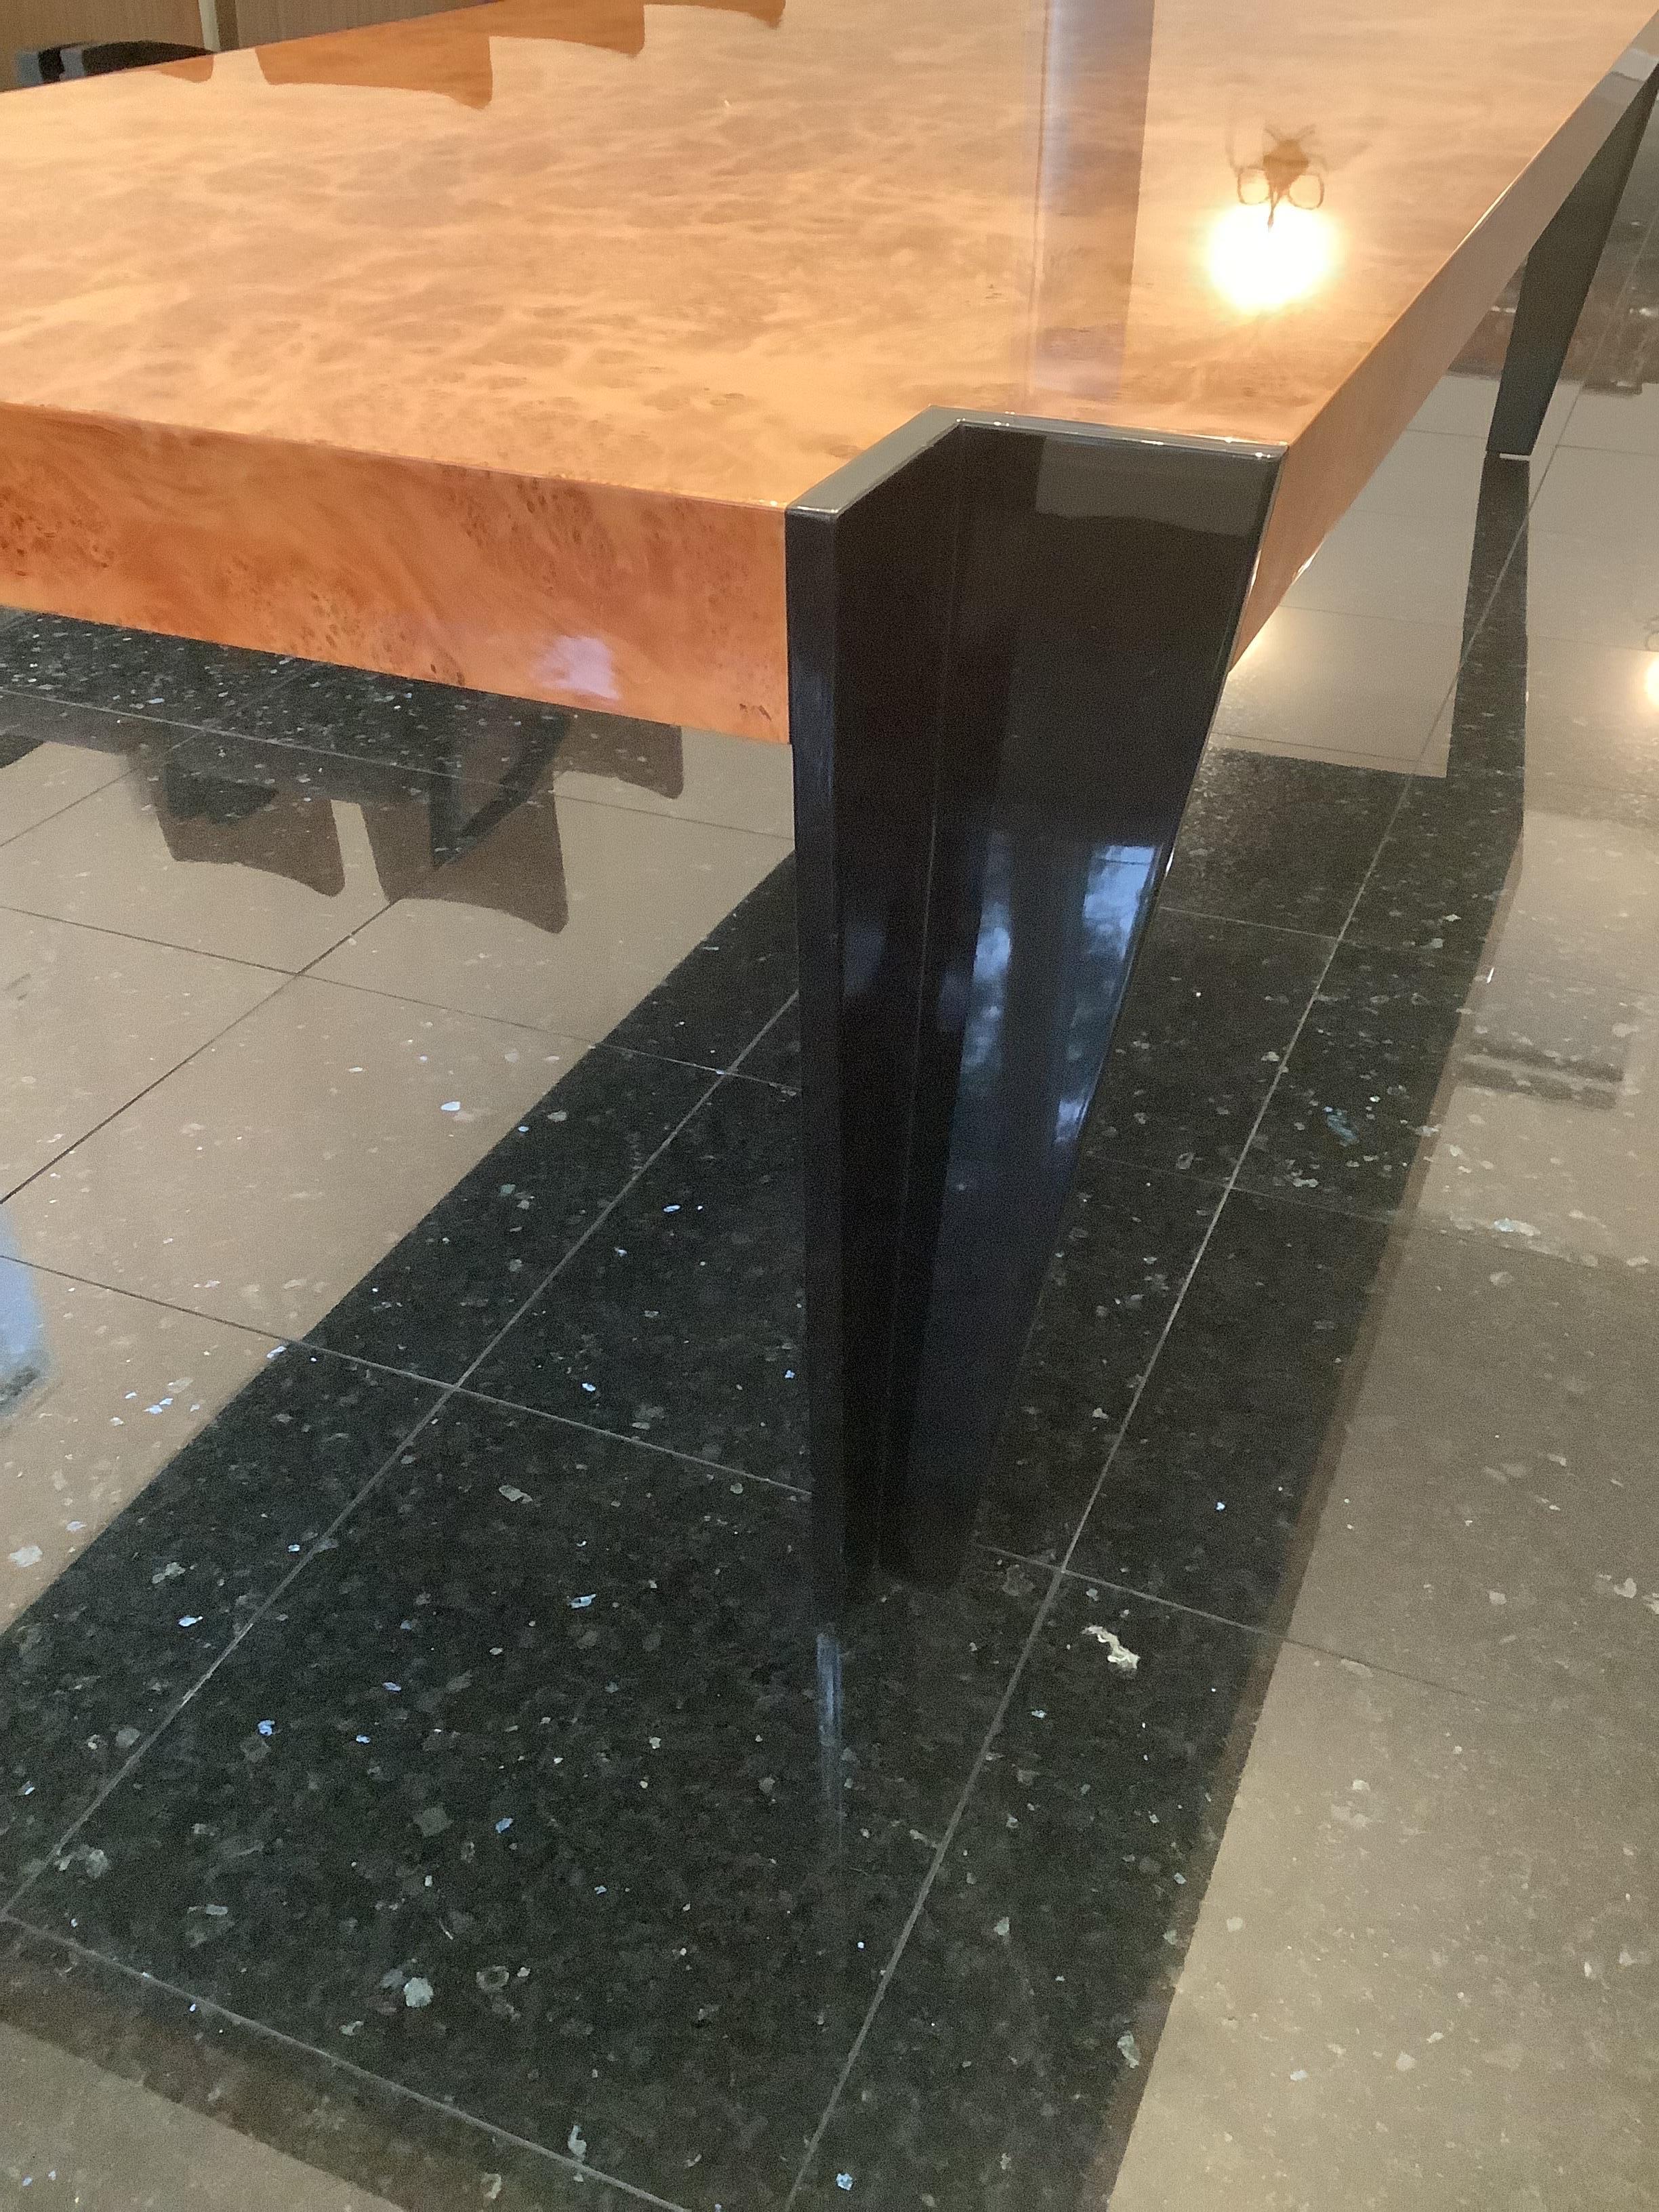 High gloss Burlwood from the Pace Collection. Lacquered Black notched legs, ultra modern concept with an art deco flare. Solid thick Burlwood table-top in one seamless slab. Great for any space that has modern minimalist decoration and furnishings.